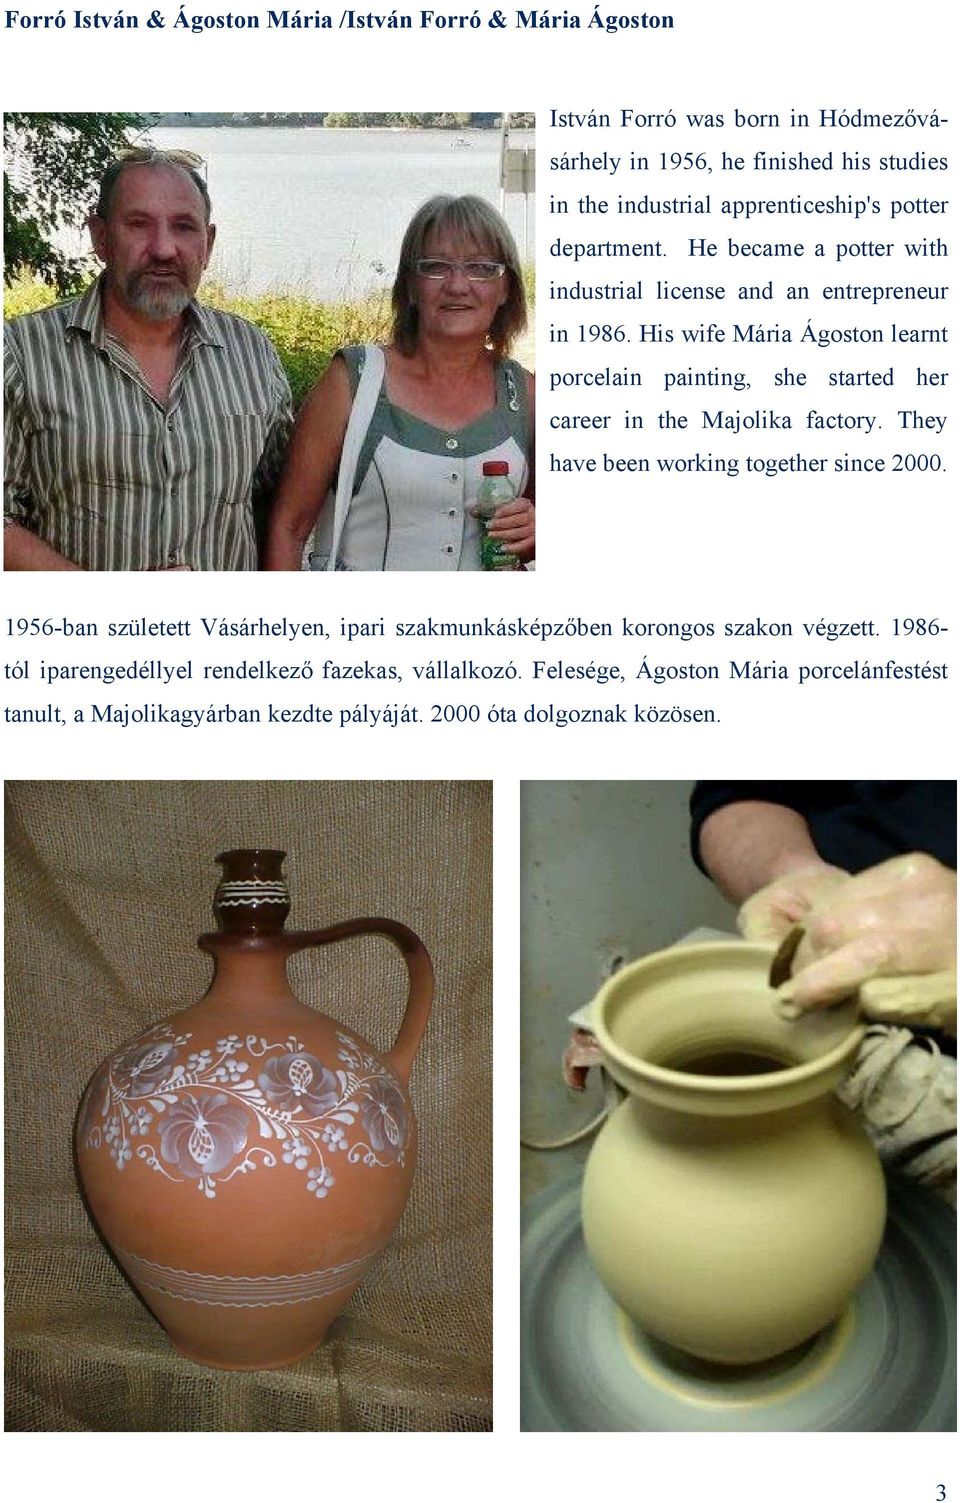 His wife Mária Ágoston learnt porcelain painting, she started her career in the Majolika factory. They have been working together since 2000.